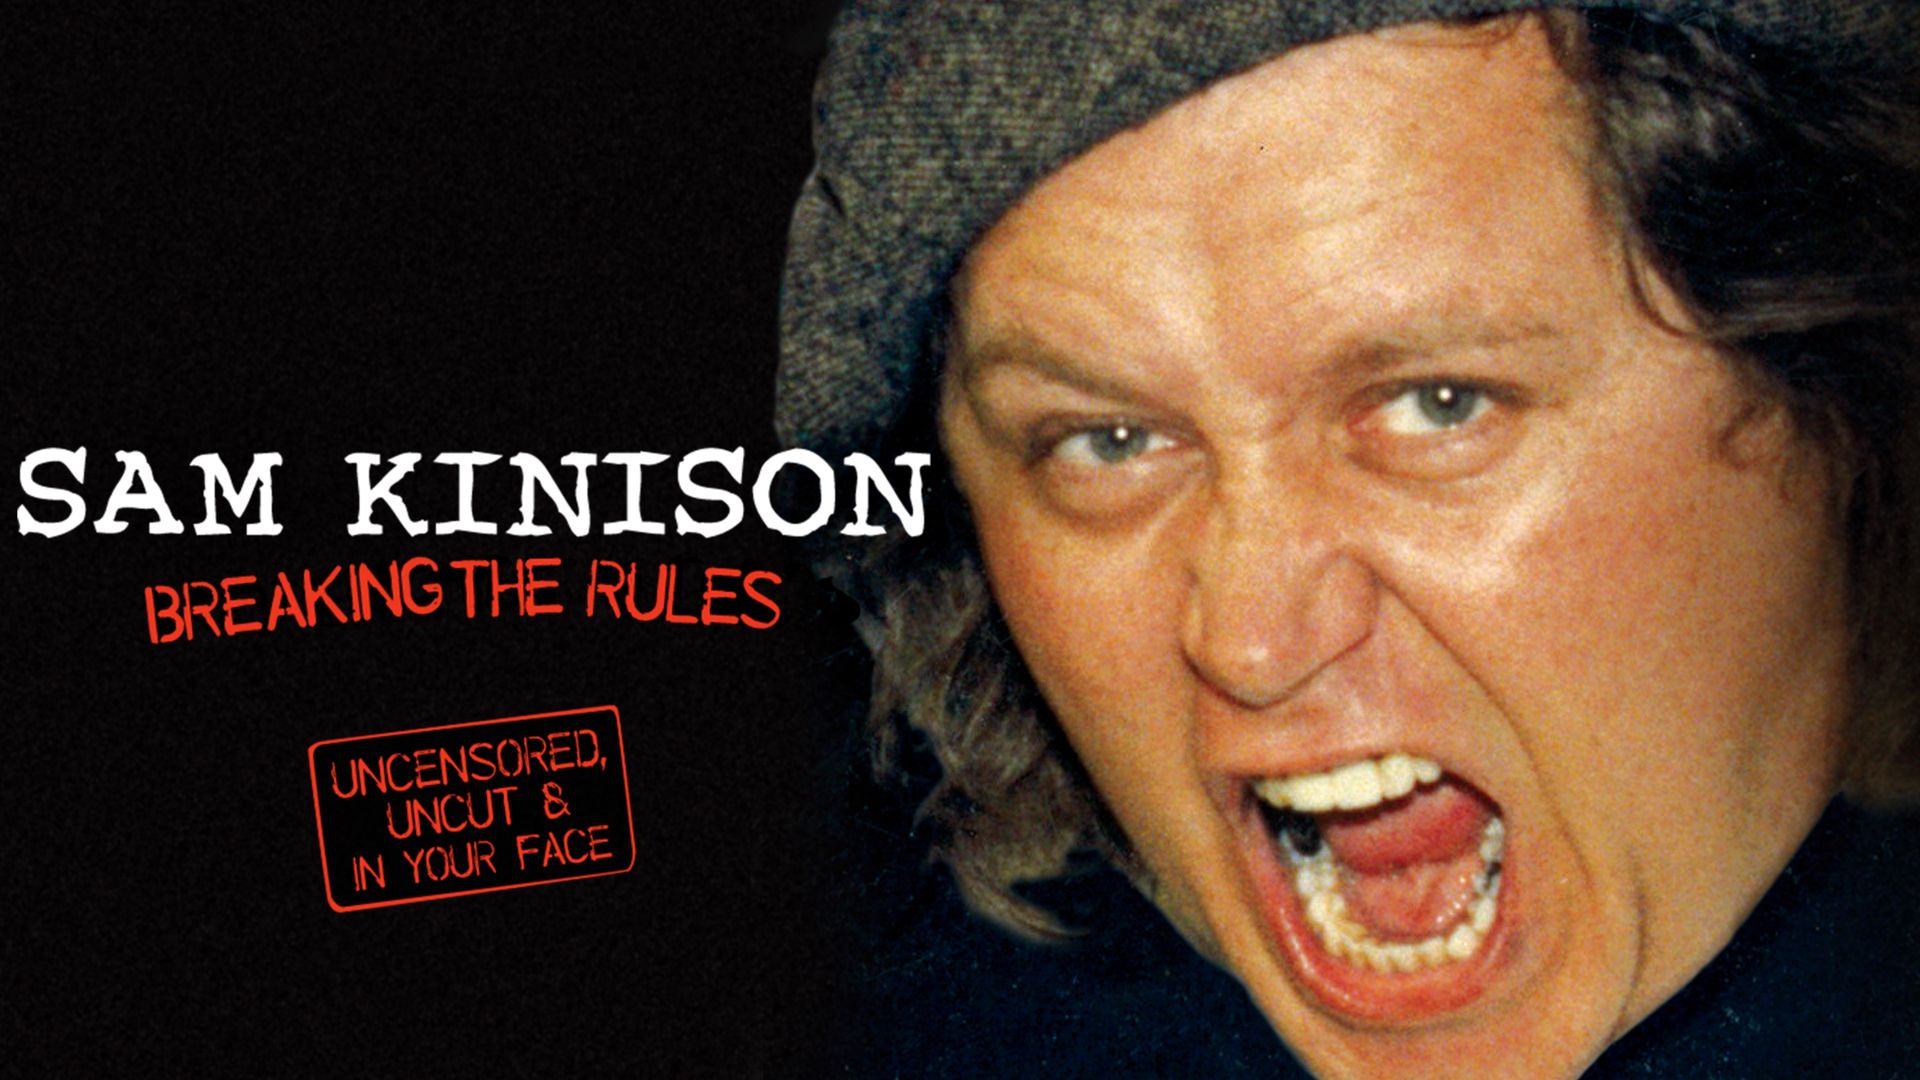 Sam Kinison: Breaking the Rules Backdrop